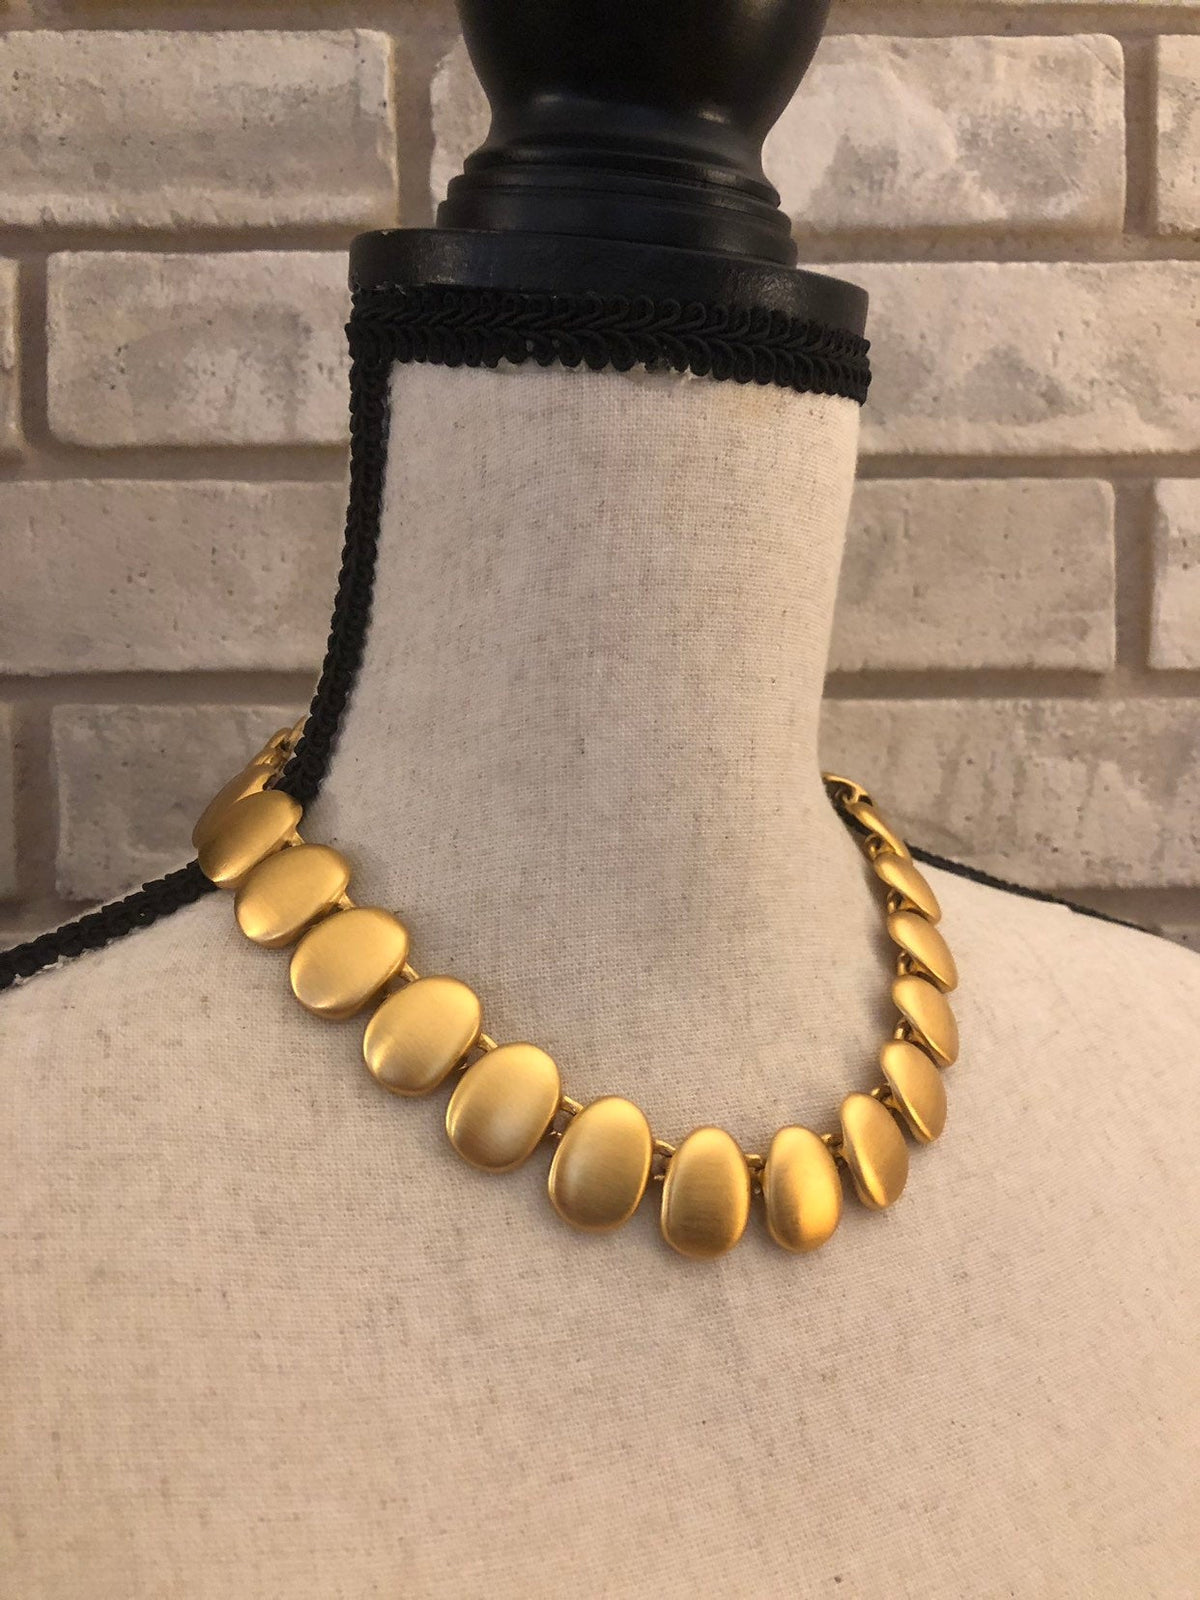 Vintage Anne Klein Classic Gold Necklace - 24 Wishes Vintage Jewelry